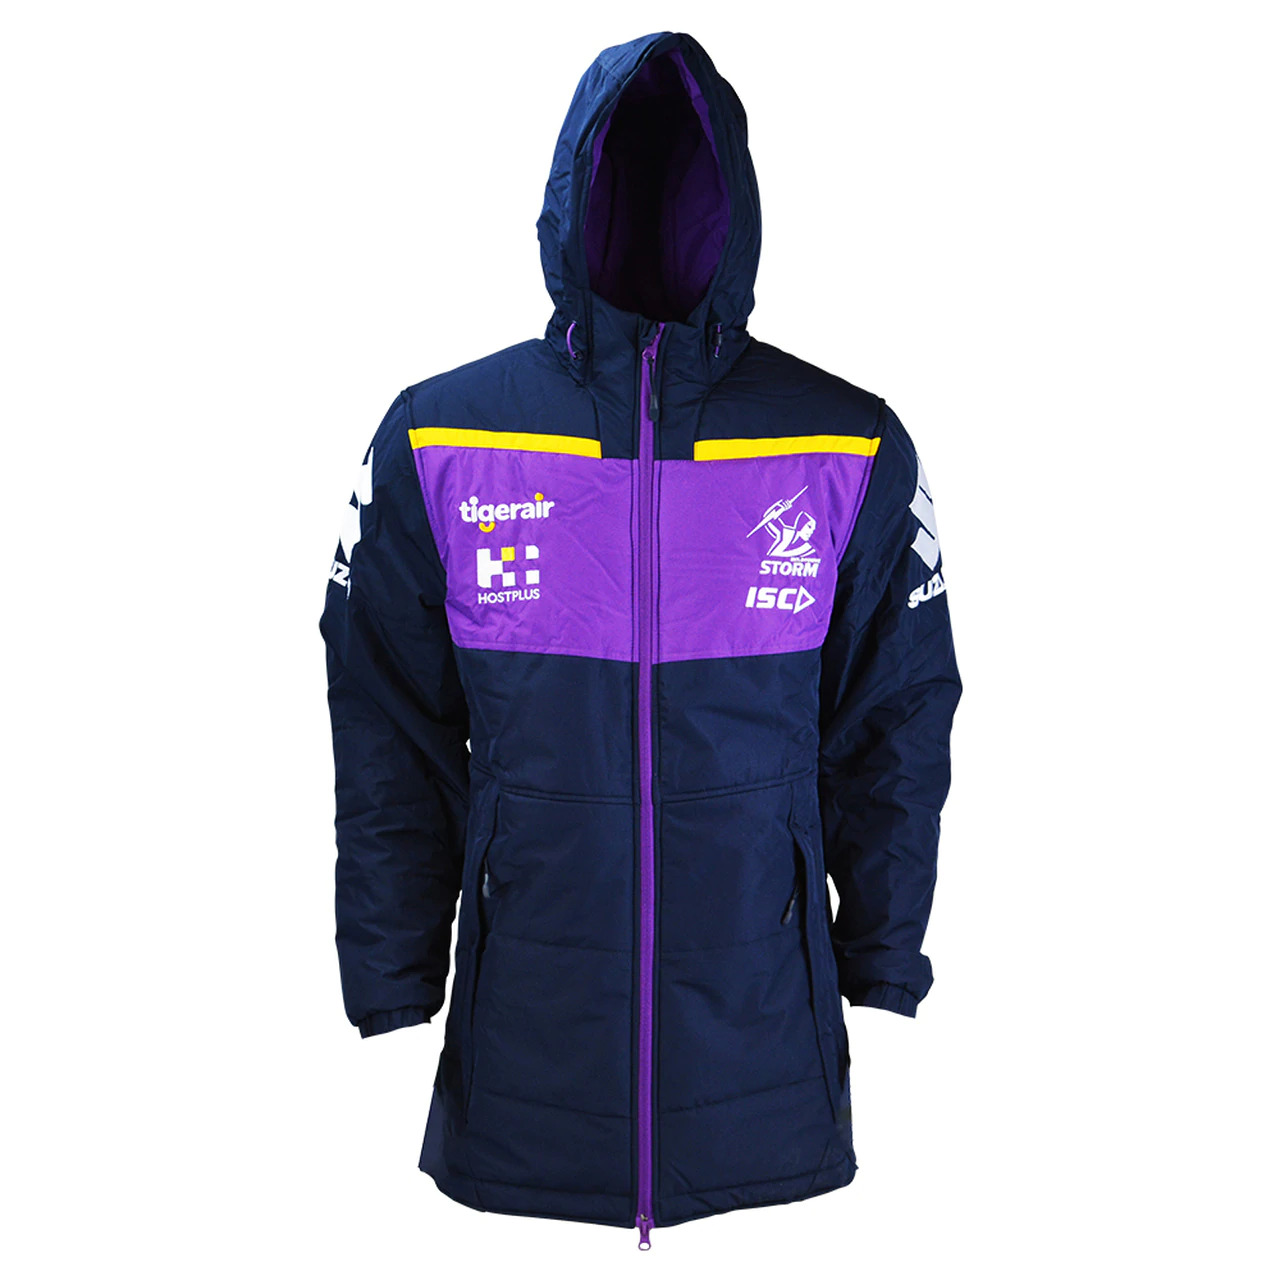 Details about   Melbourne Storm NRL 2020 Players ISC Wet Weather Jacket Sizes S-5XL! 